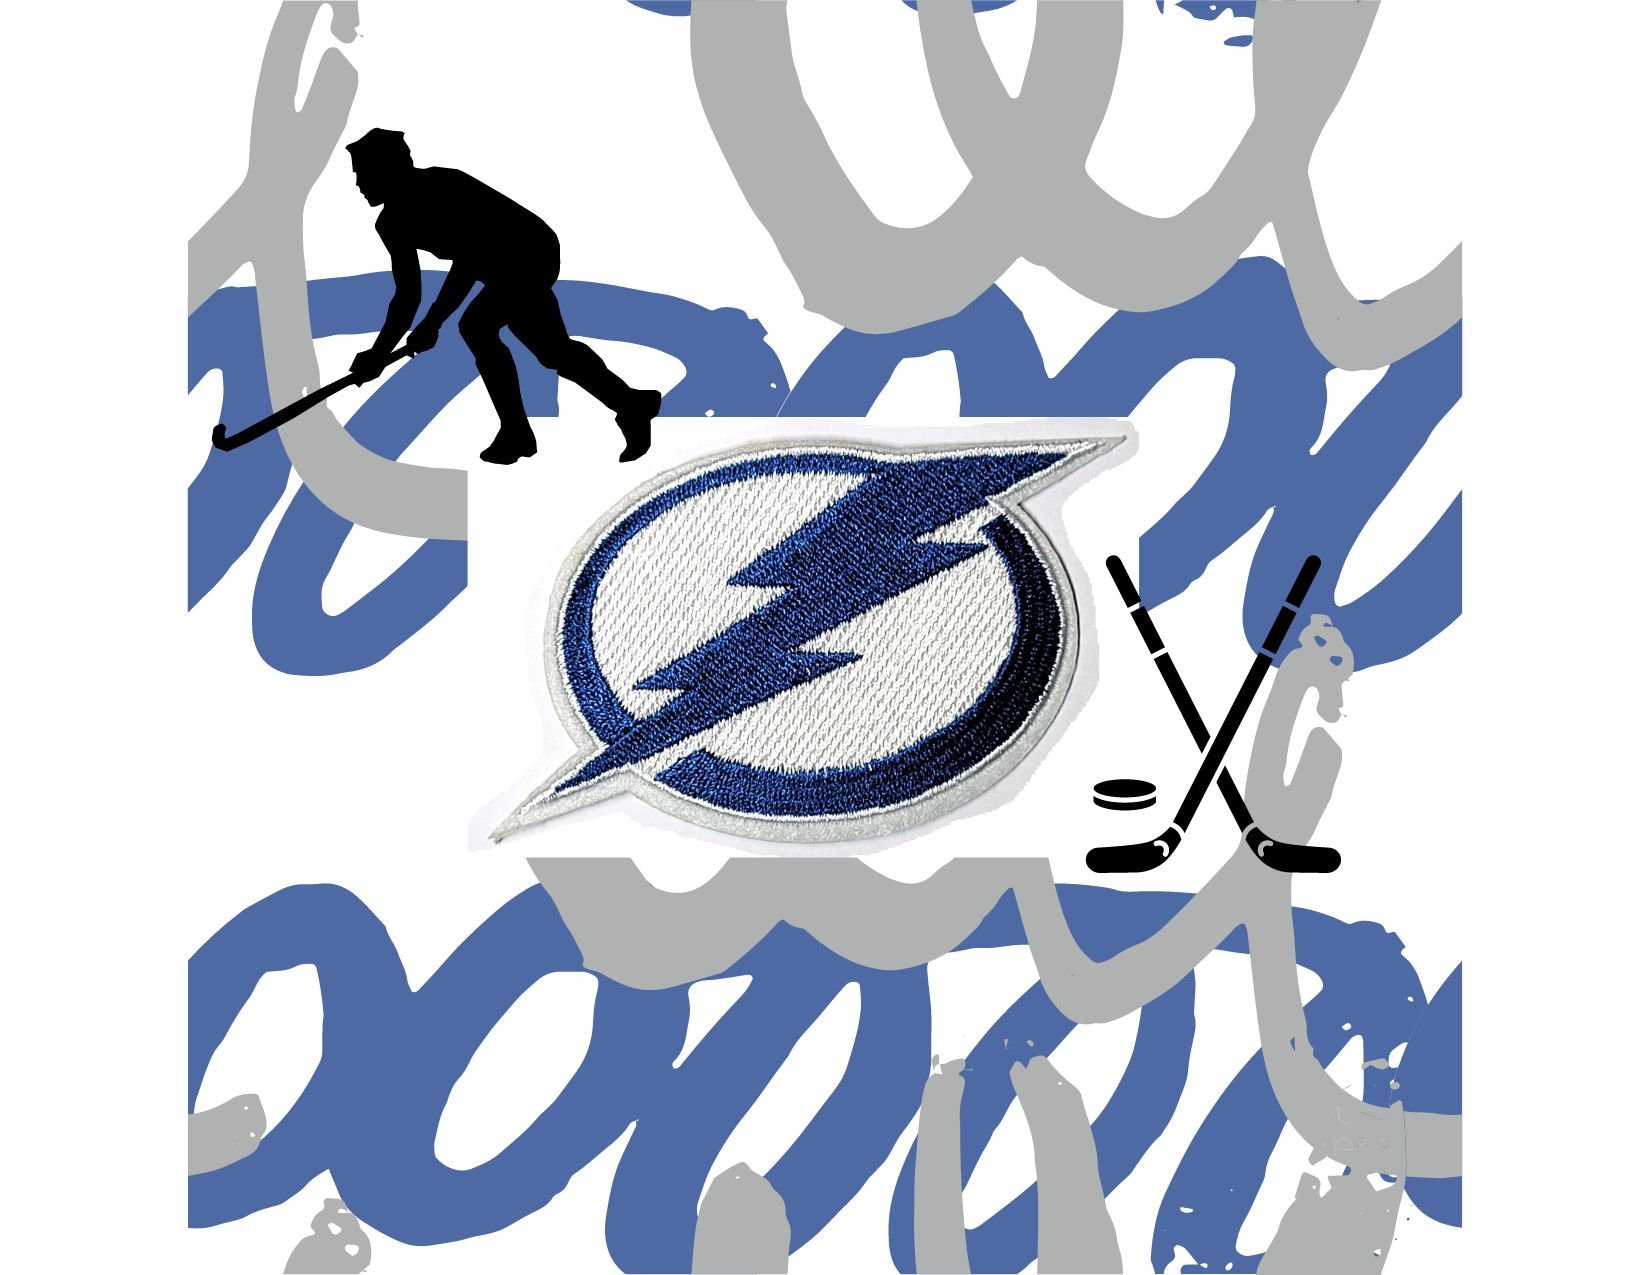 Tampa Bay Lightning - Sports logo - patch - patches - collect